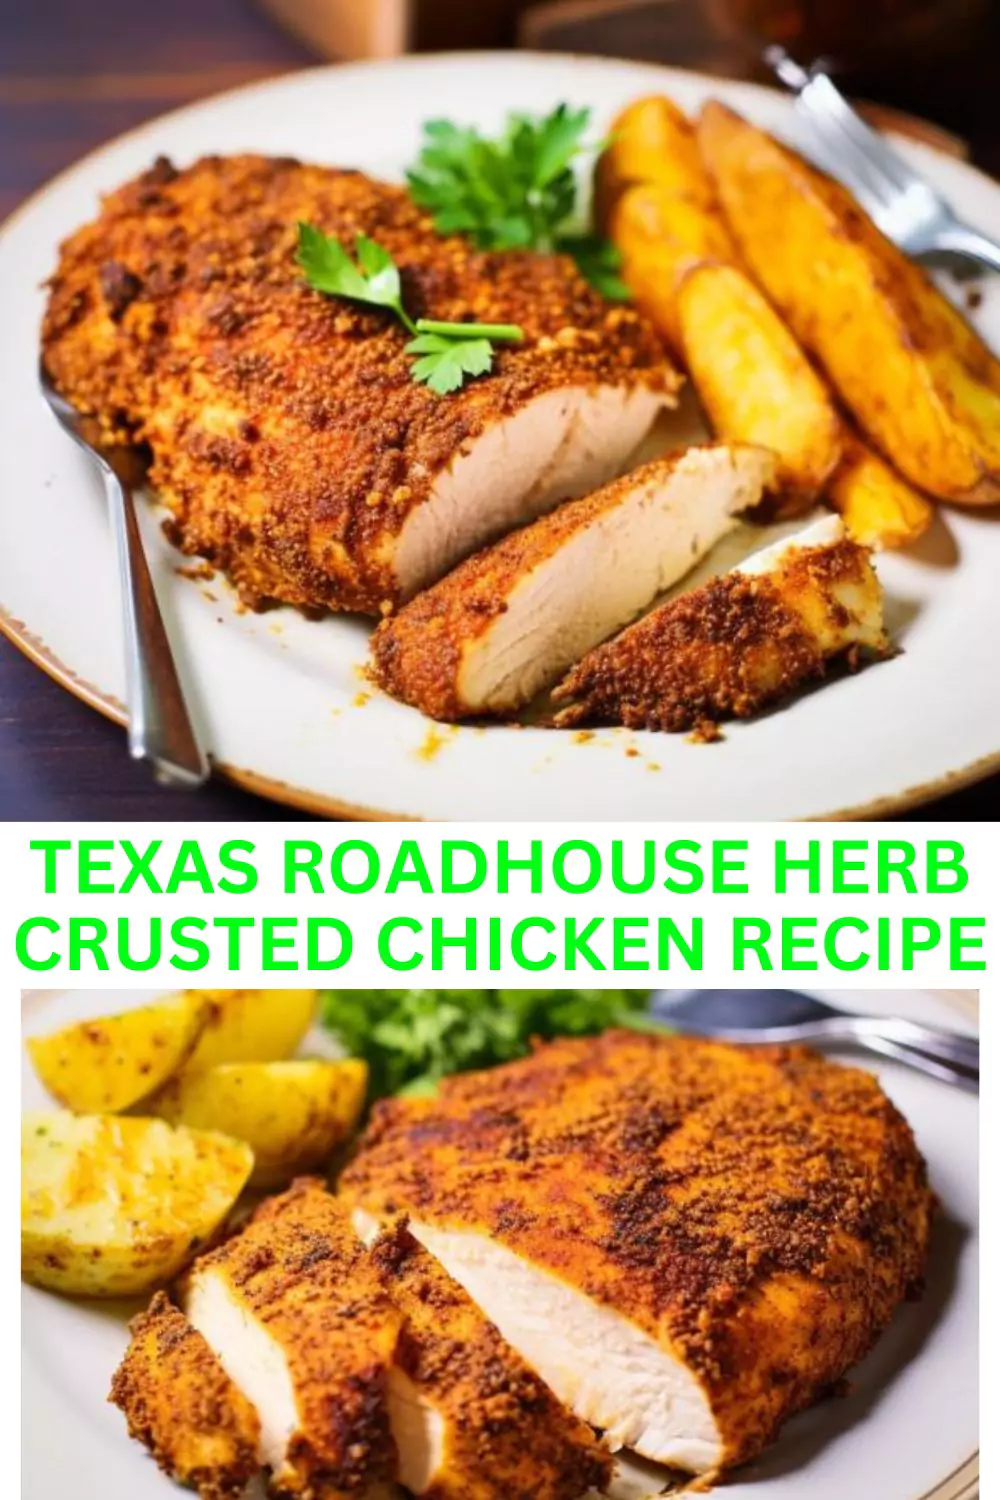 Best Texas Roadhouse Herb Crusted Chicken Recipe